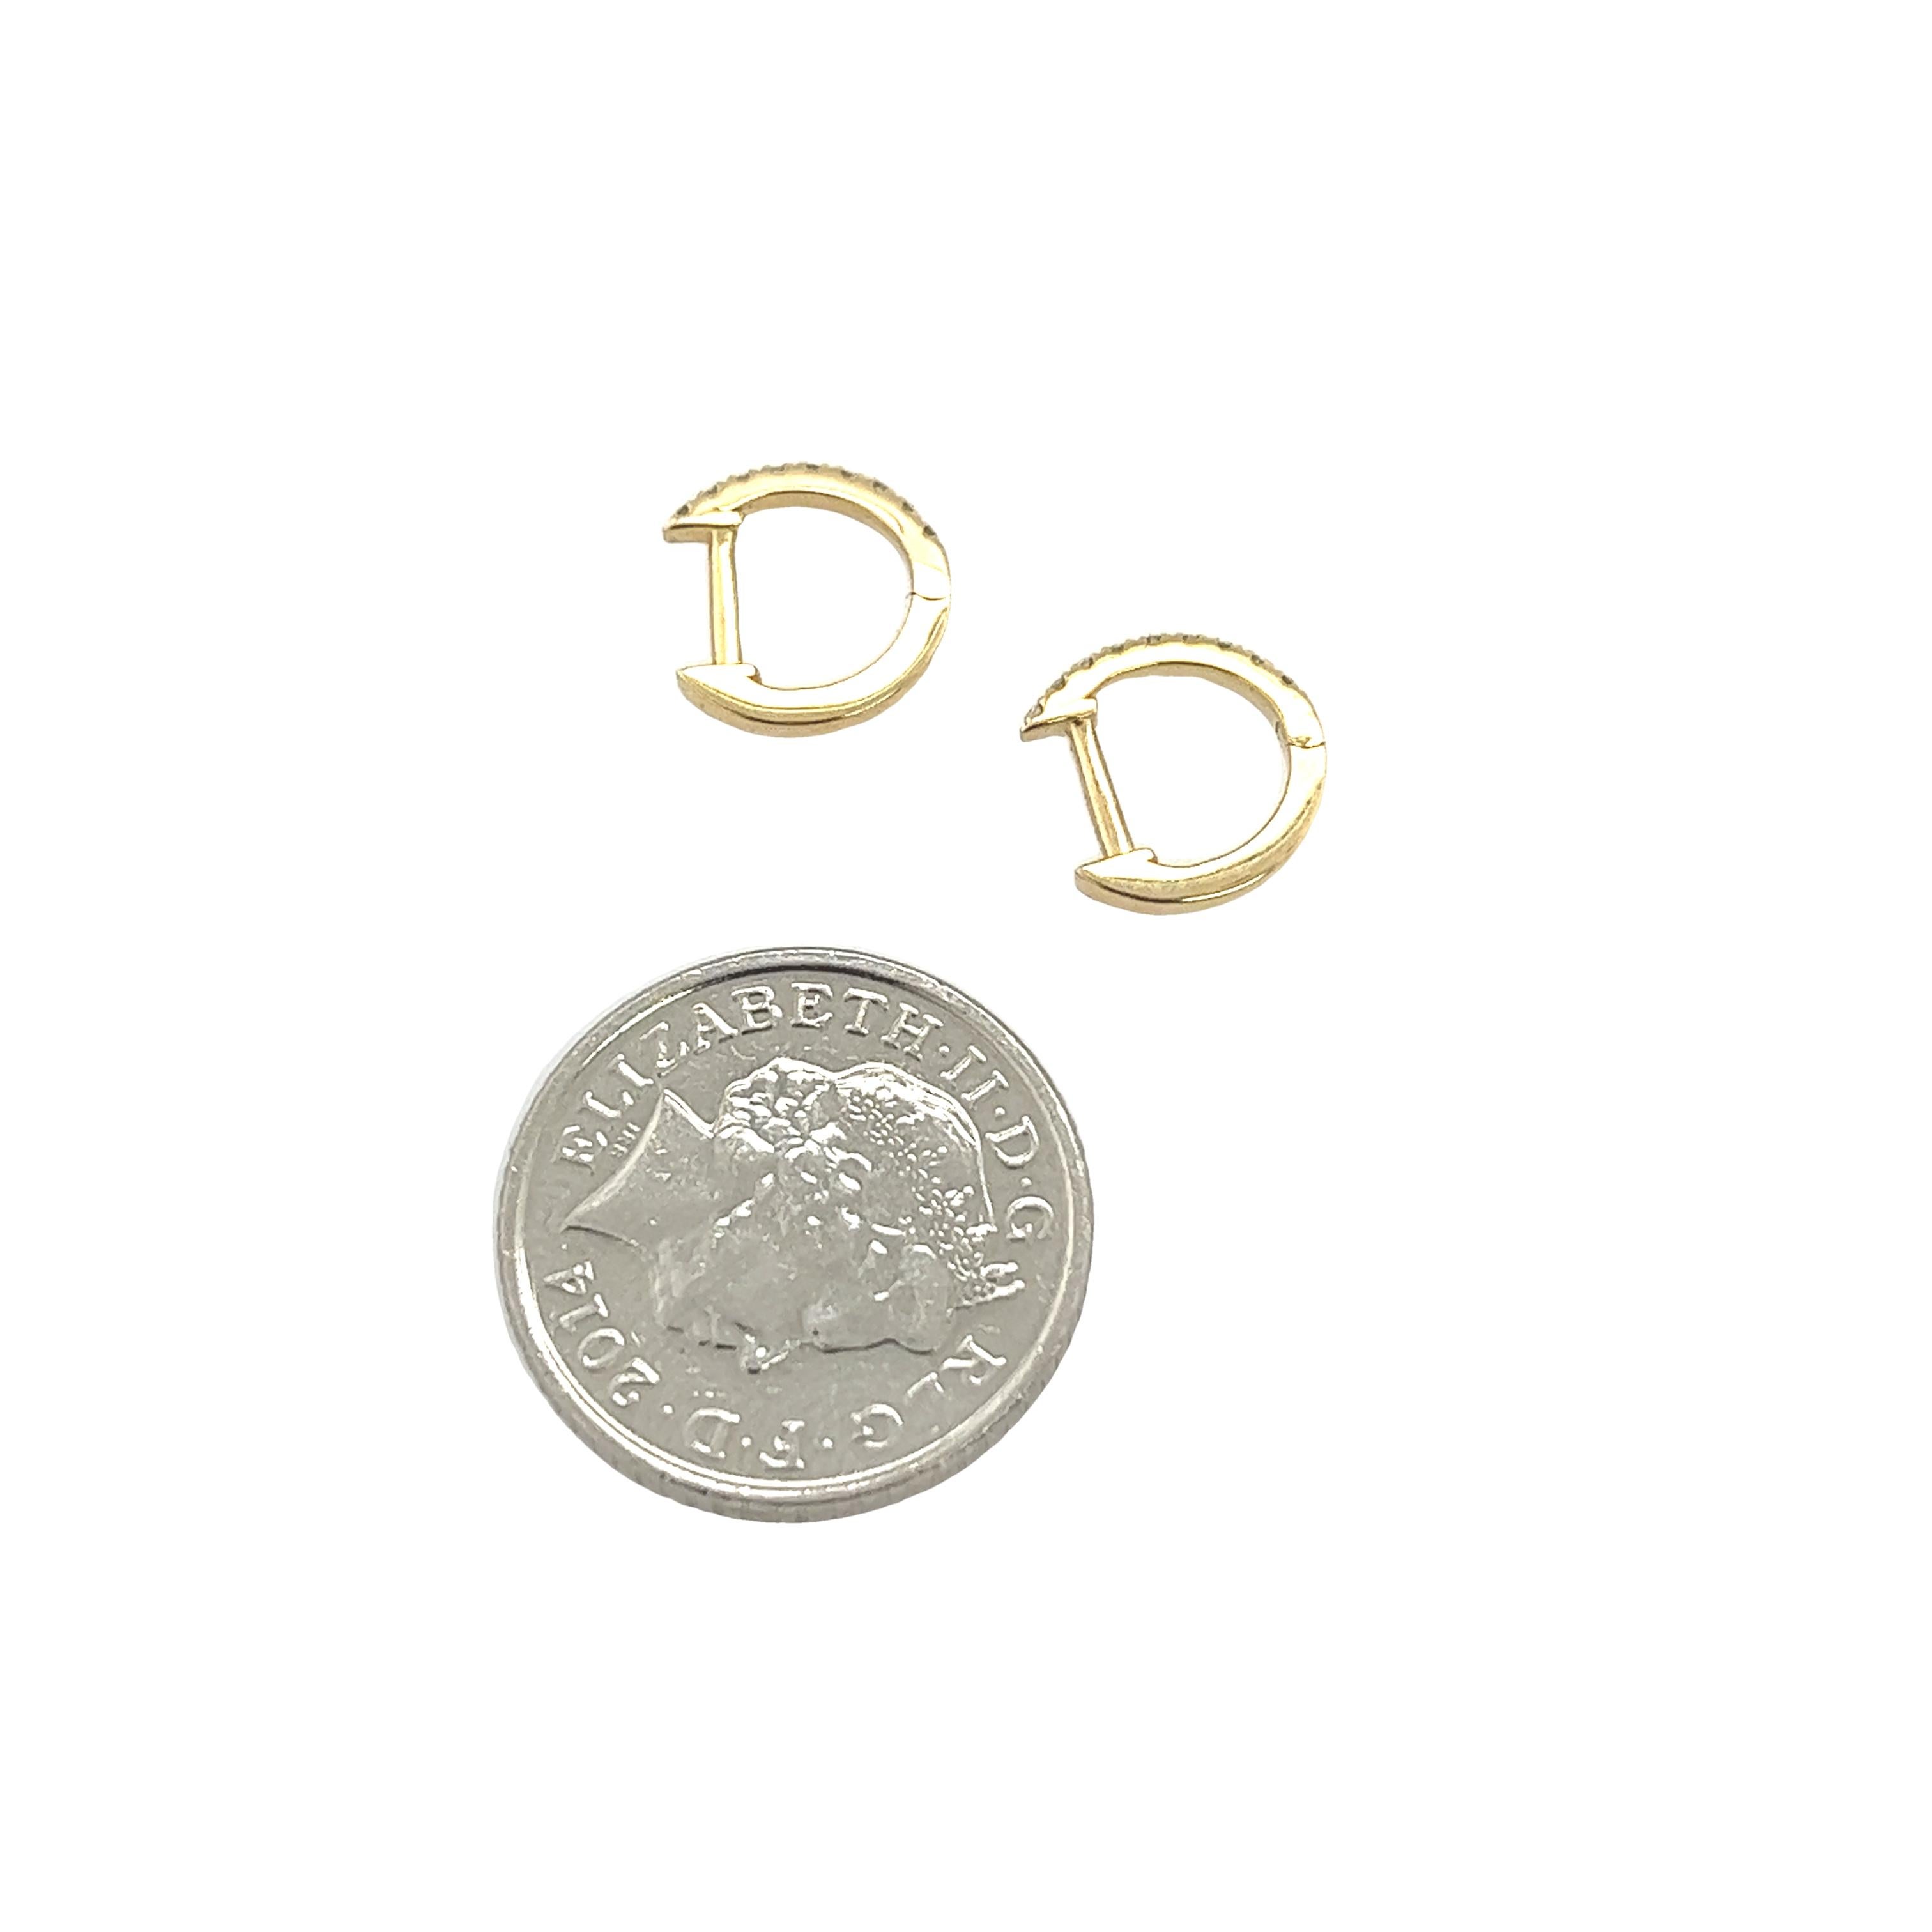 These earrings measure 9mm in diameter and are set with 0.08ct of round diamonds. They are a great choice for women who loves to wear jewellery that is both classy and elegant. These earrings are a perfect choice for any occasion.

Total Diamond